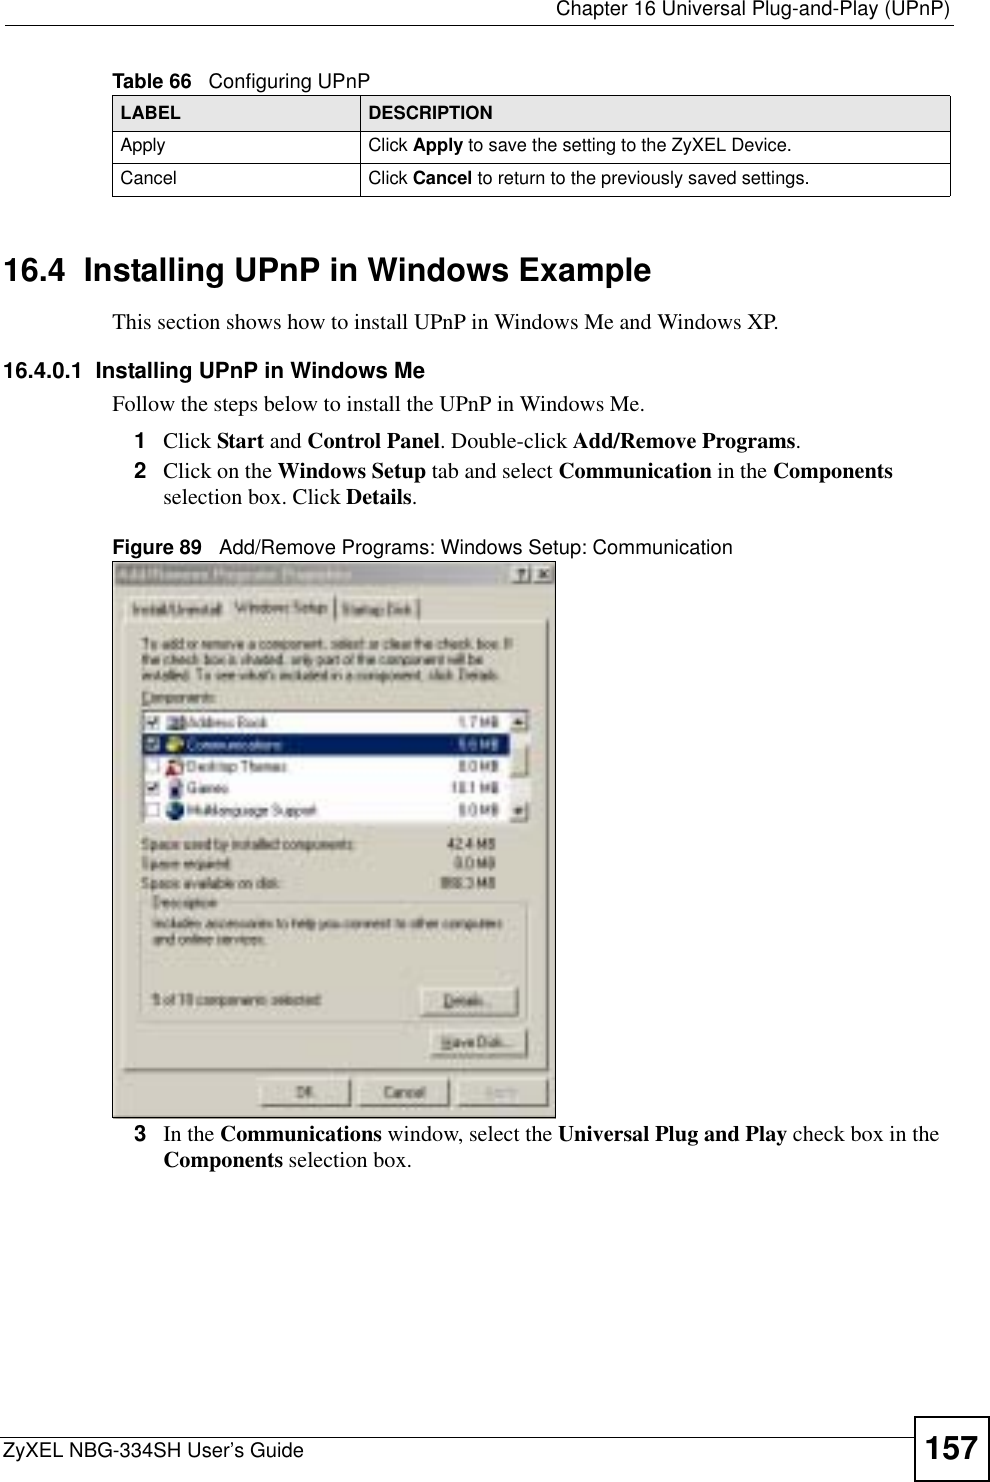  Chapter 16 Universal Plug-and-Play (UPnP)ZyXEL NBG-334SH User’s Guide 15716.4  Installing UPnP in Windows ExampleThis section shows how to install UPnP in Windows Me and Windows XP.  16.4.0.1  Installing UPnP in Windows MeFollow the steps below to install the UPnP in Windows Me. 1Click Start and Control Panel. Double-click Add/Remove Programs.2Click on the Windows Setup tab and select Communication in the Componentsselection box. Click Details.Figure 89   Add/Remove Programs: Windows Setup: Communication 3In the Communications window, select the Universal Plug and Play check box in the Components selection box. Apply Click Apply to save the setting to the ZyXEL Device.Cancel Click Cancel to return to the previously saved settings.Table 66   Configuring UPnPLABEL DESCRIPTION